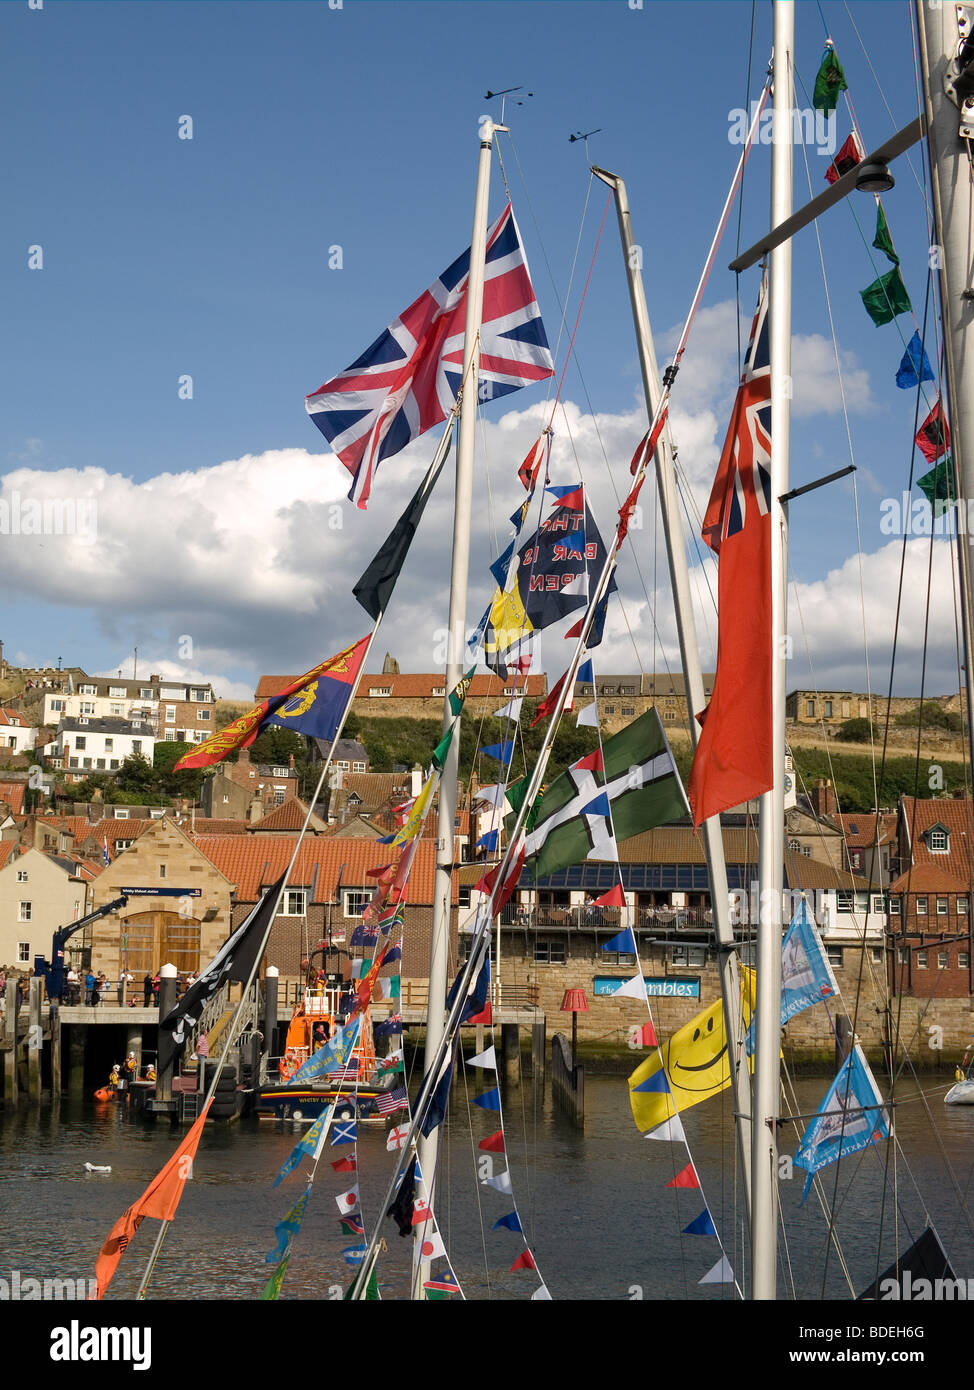 Whitby town seen through flags and bunting on yachts in harbour for the 169th annual Regatta August 2009 Stock Photo